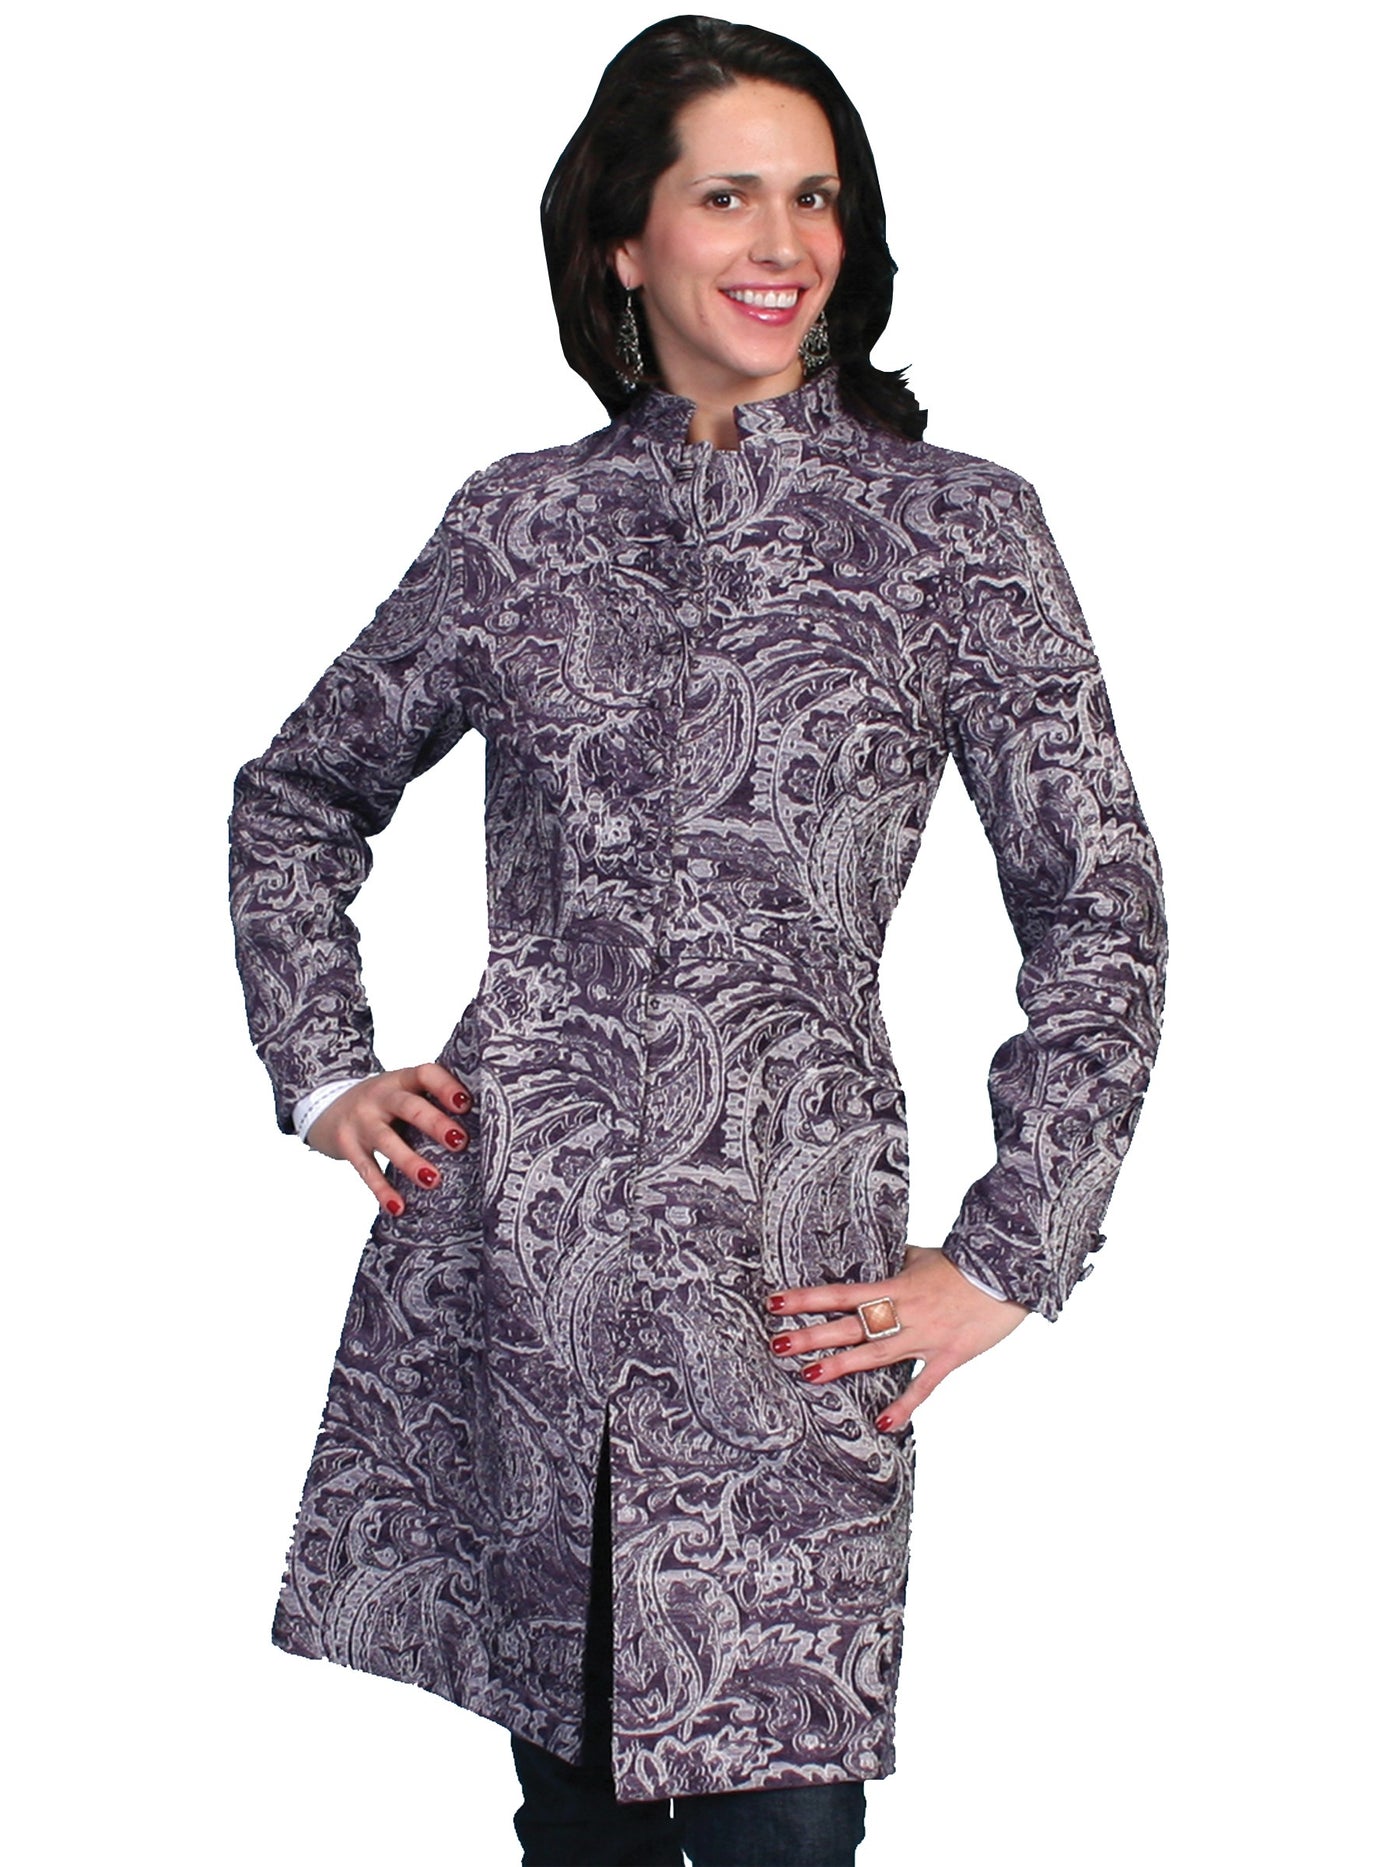 Western Style Tapestry Coat in Plum - SOLD OUT